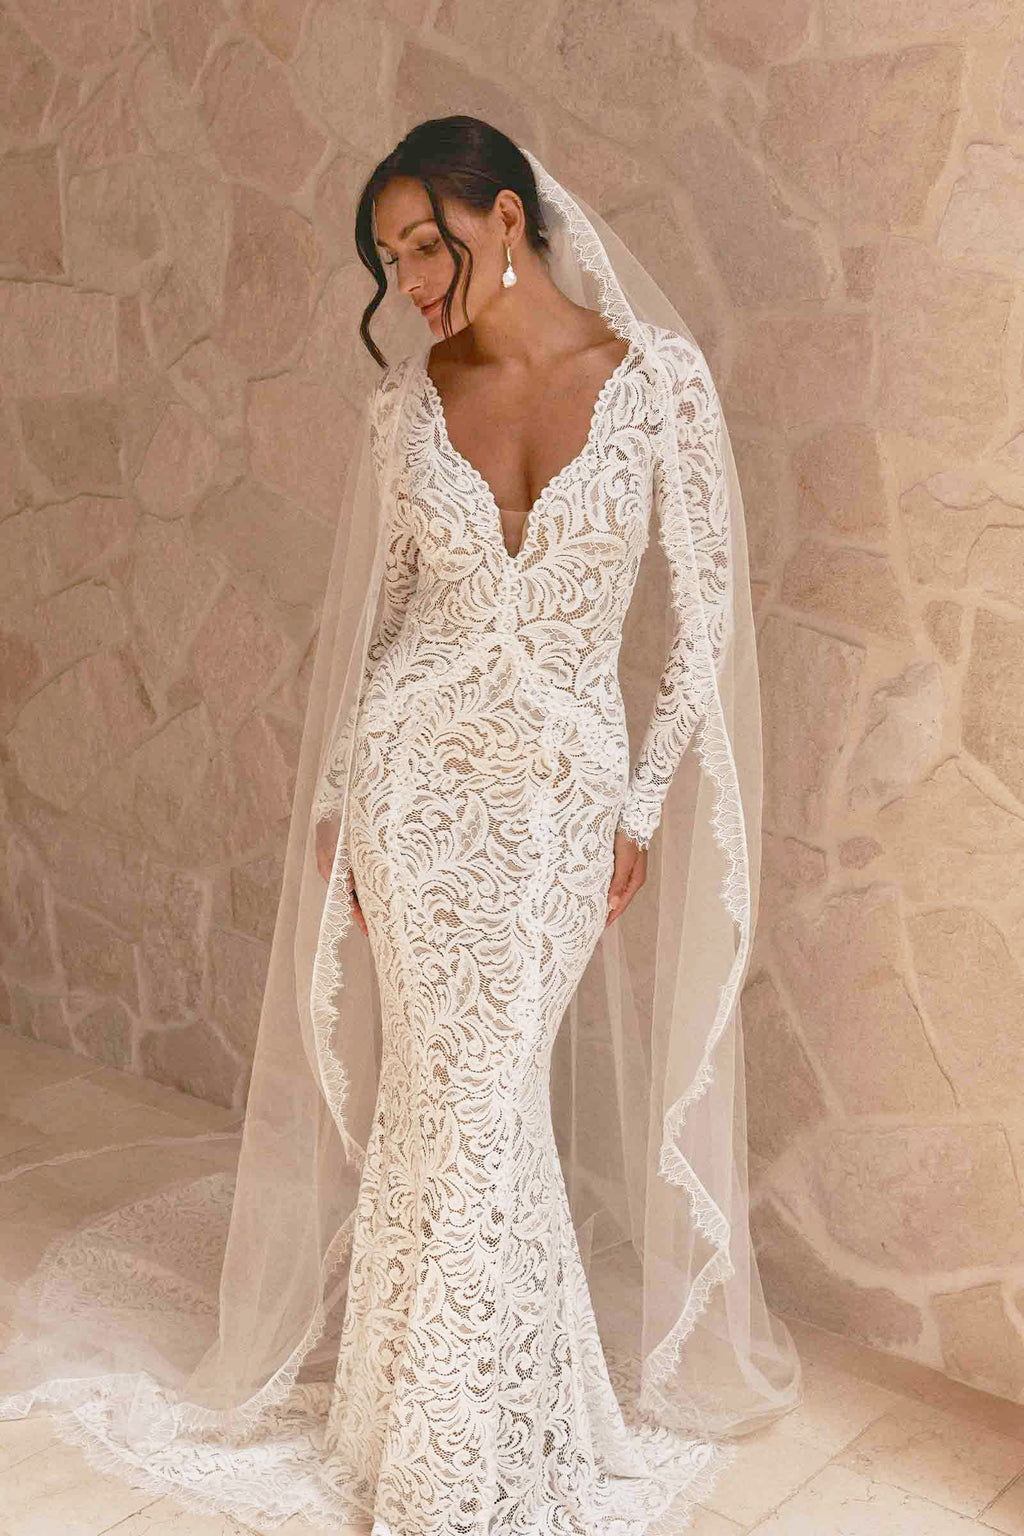 Arabic Aso Ebi Vintage Lace Beaded Halter Wedding Dress Sheer Neck Mermaid  Bridal Dresses Sexy Cheap Wedding Gowns Zj261 From Chic_cheap, $136.69 |  DHgate.Com